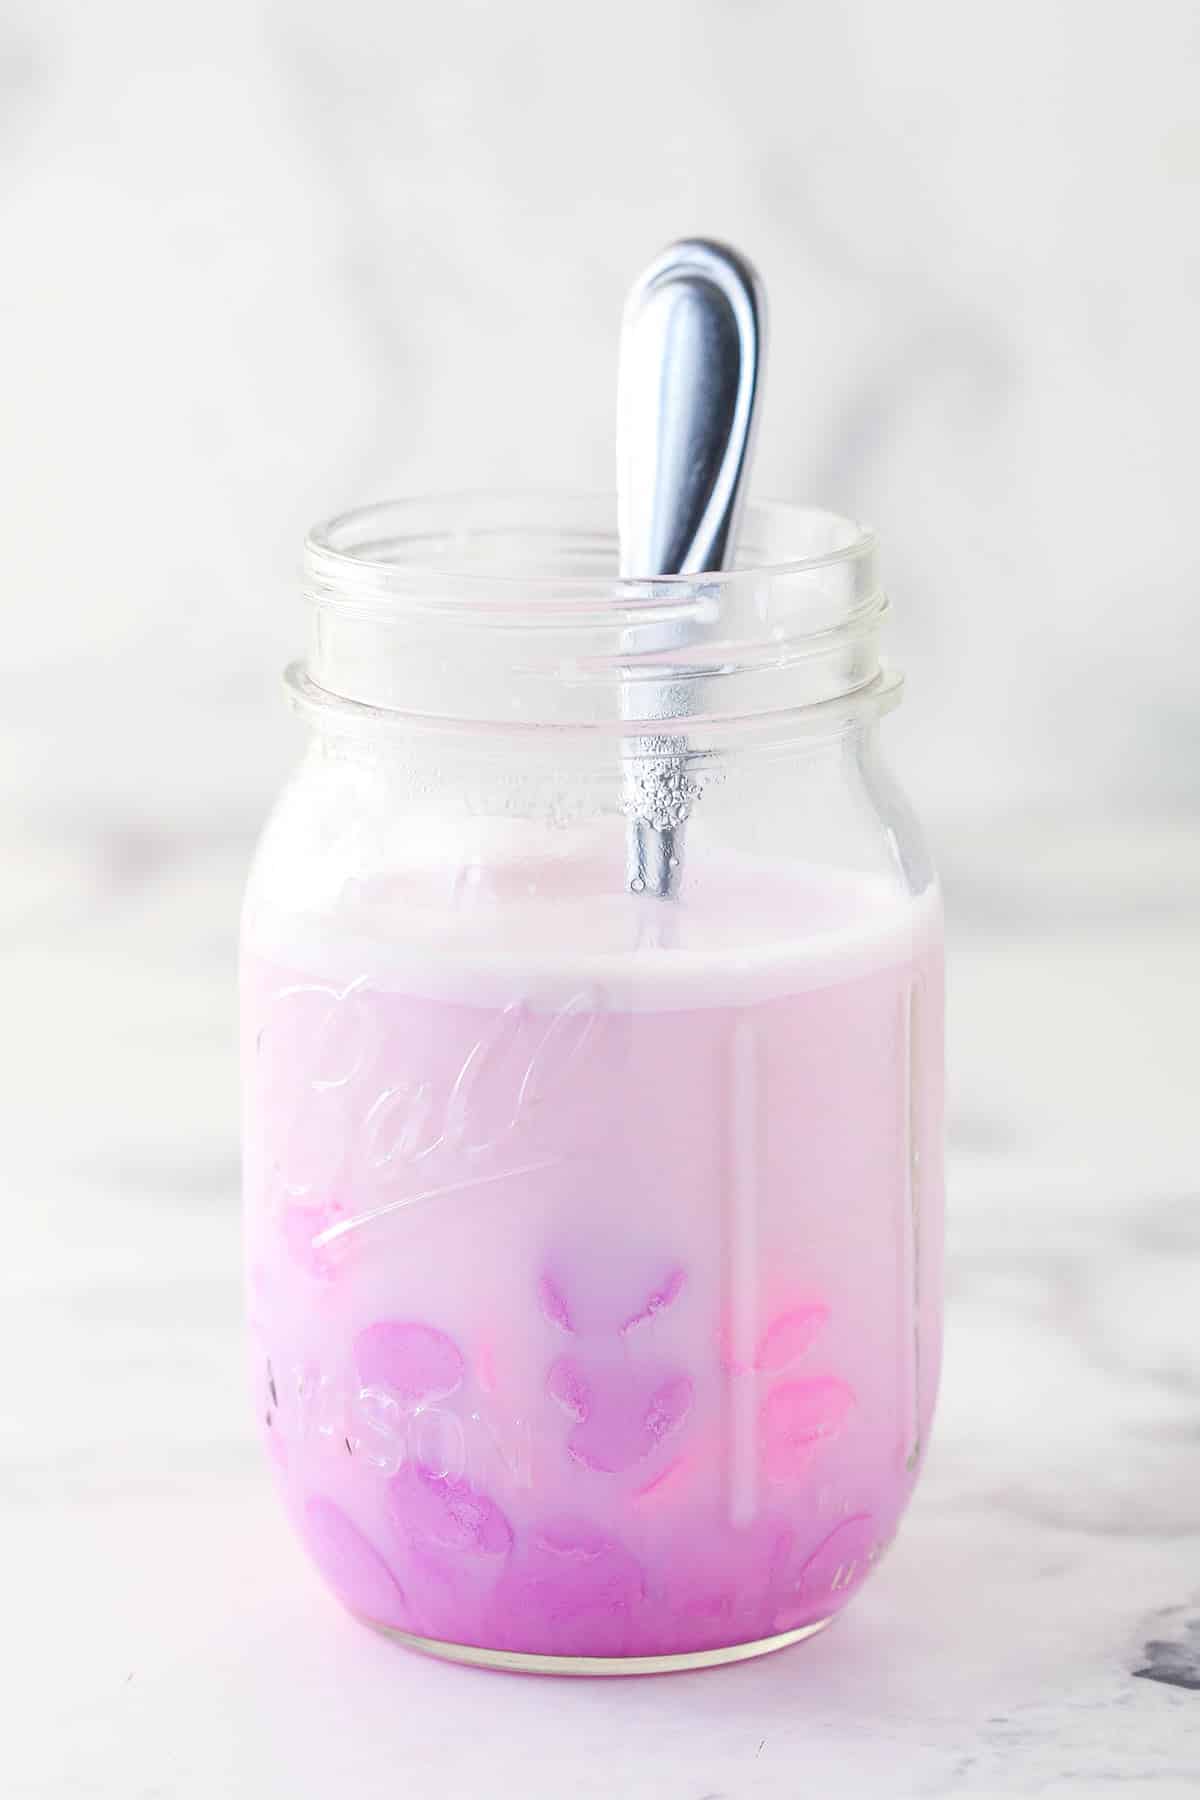 Infusing conversation heart candies into warm milk for conversation heart cupcakes.